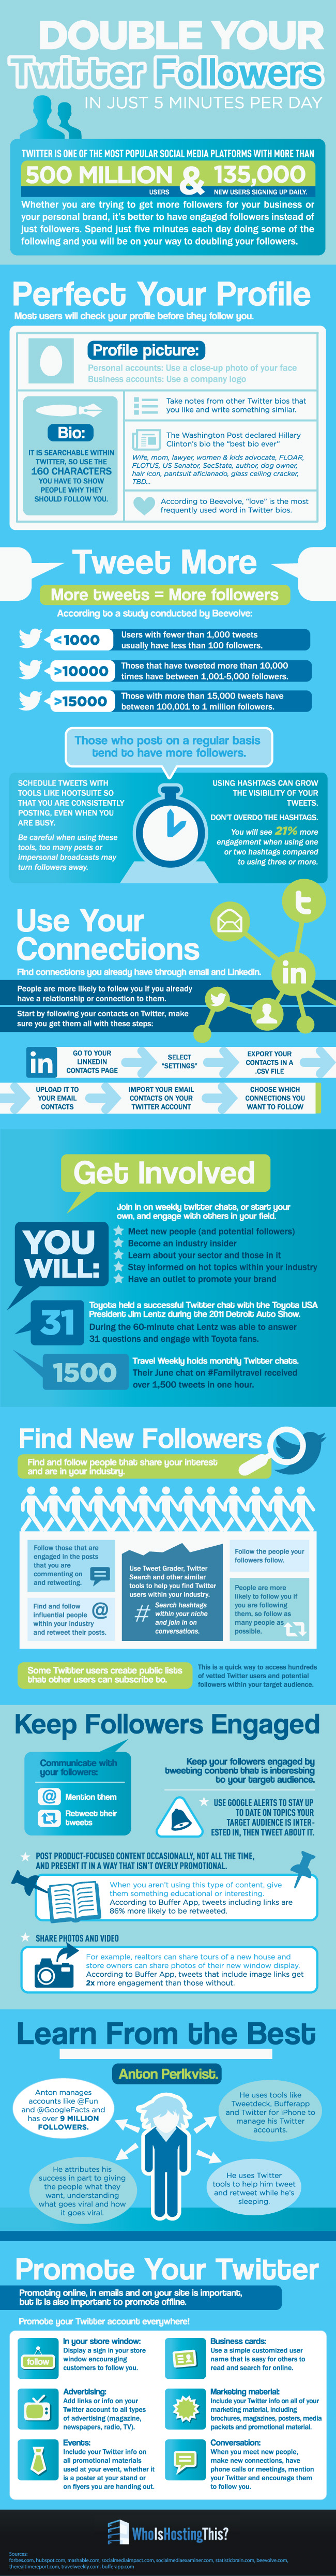 Infographic: Double Your Twitter Followers in Just 5 Minutes Per Day